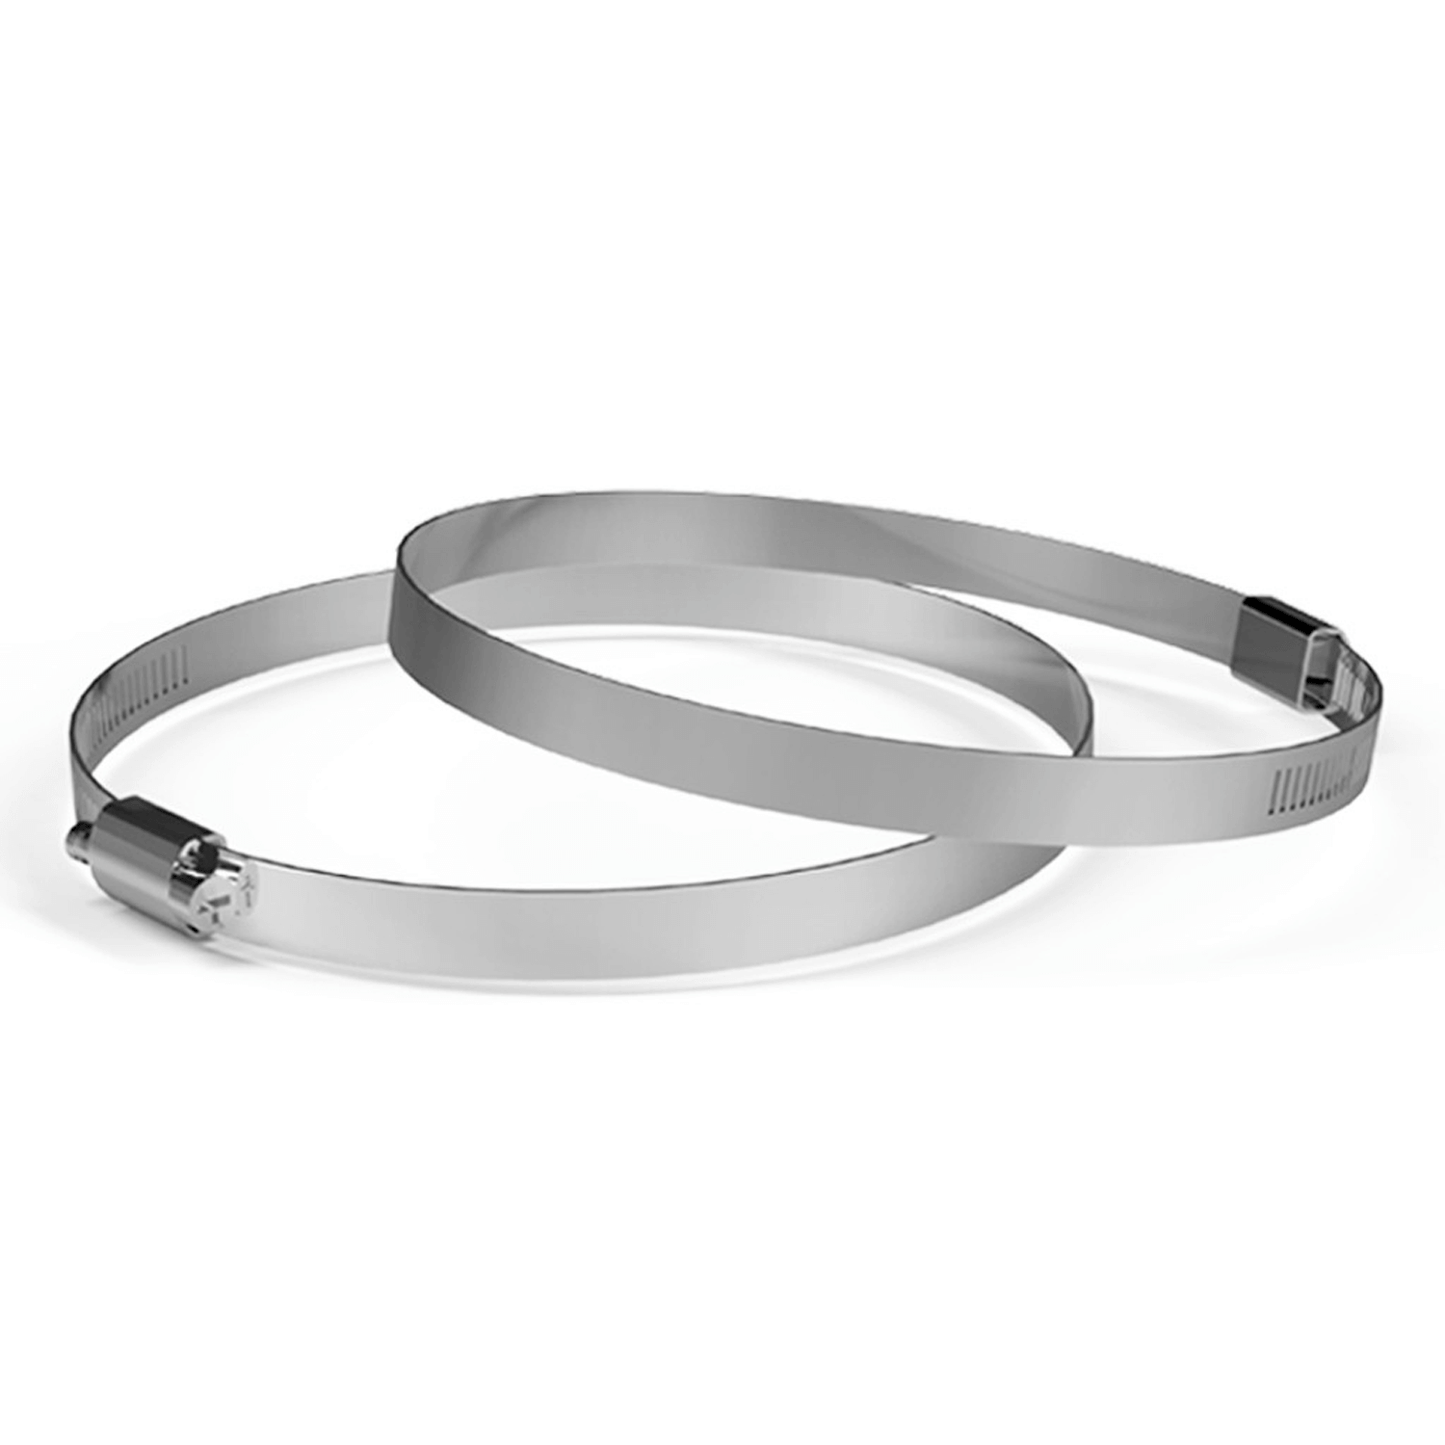 AC Infinity Stainless Steel Duct Clamps, 6-Inch, Two Pack | AC-DCA6-2 | Grow Tents Depot | Climate Control | 819137020573